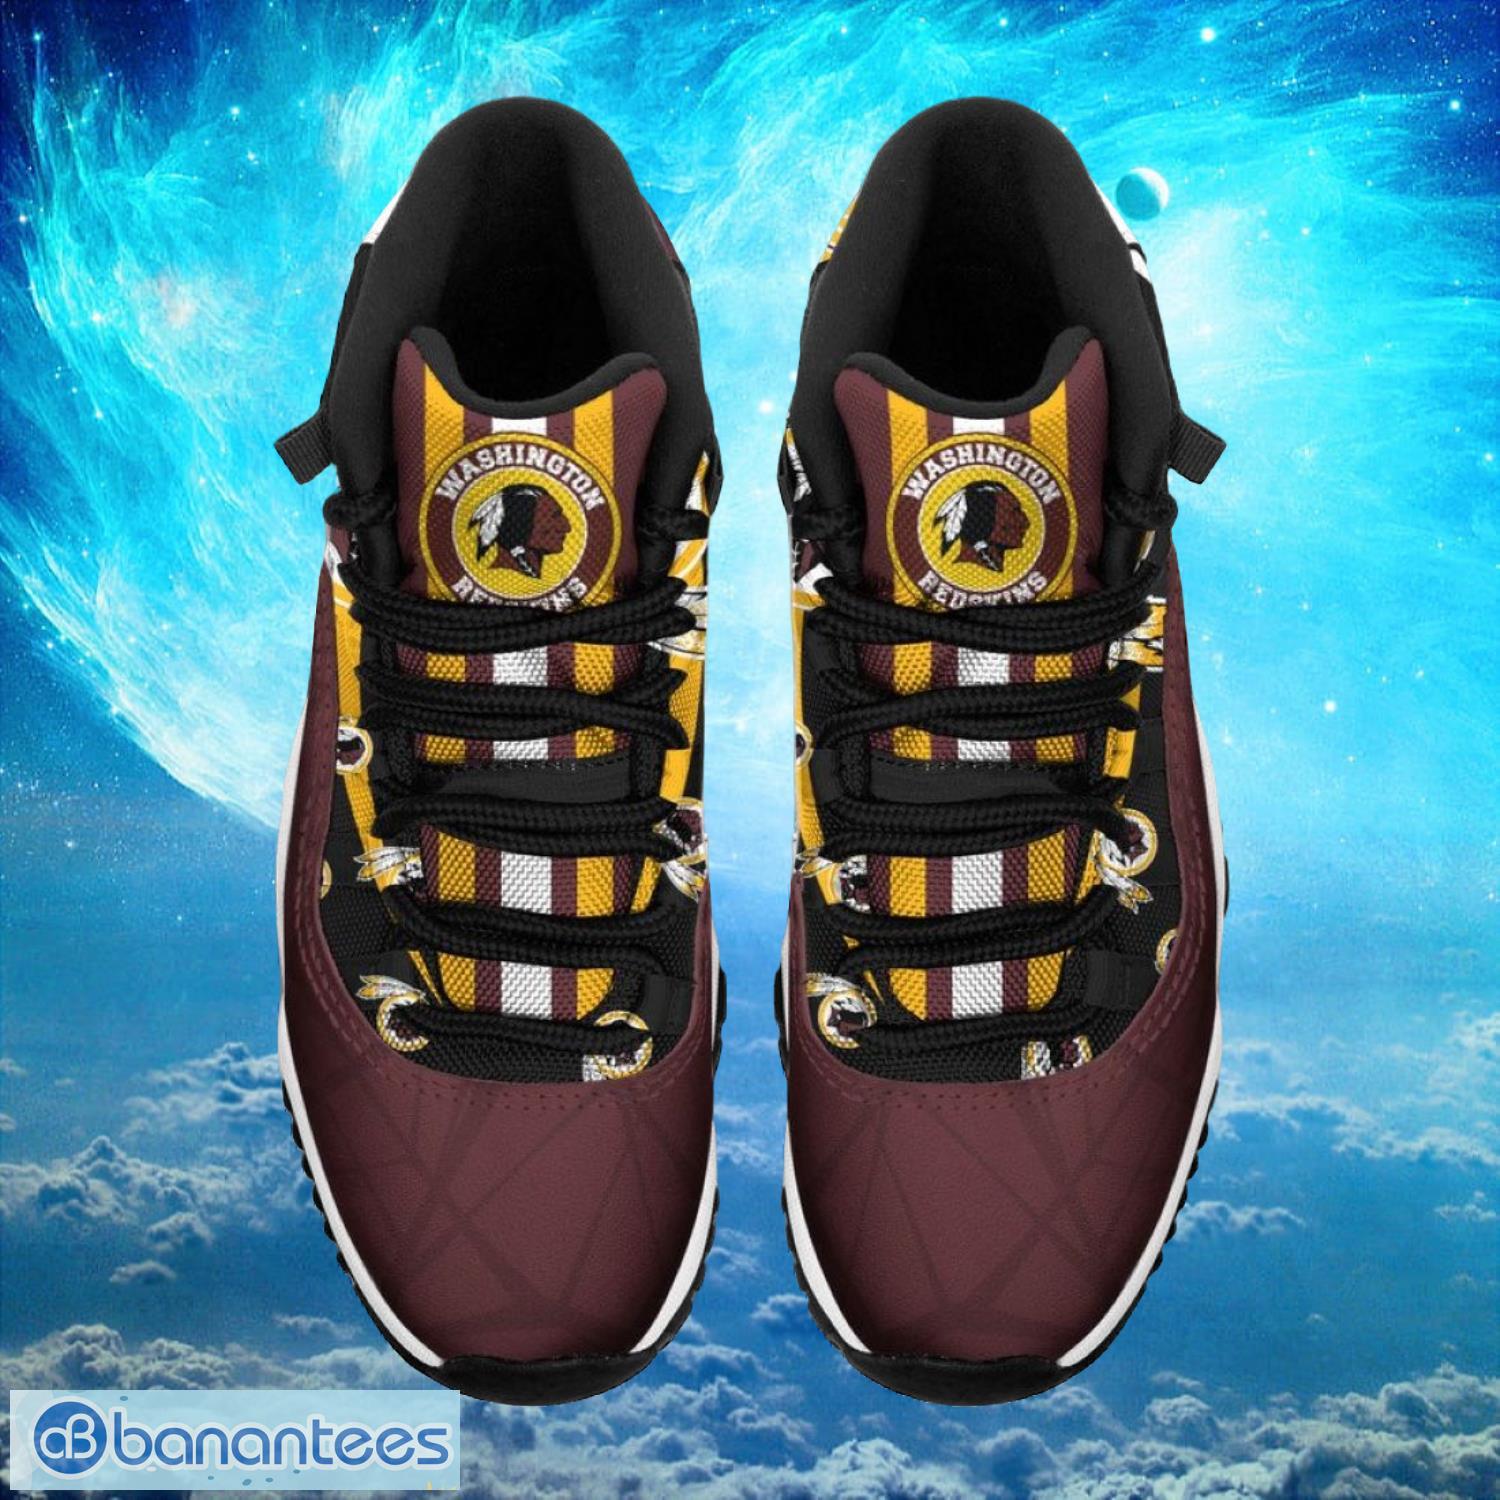 Washington Redskins NFL Air Jordan 11 Sneakers Shoes Gift For Fans Product Photo 2